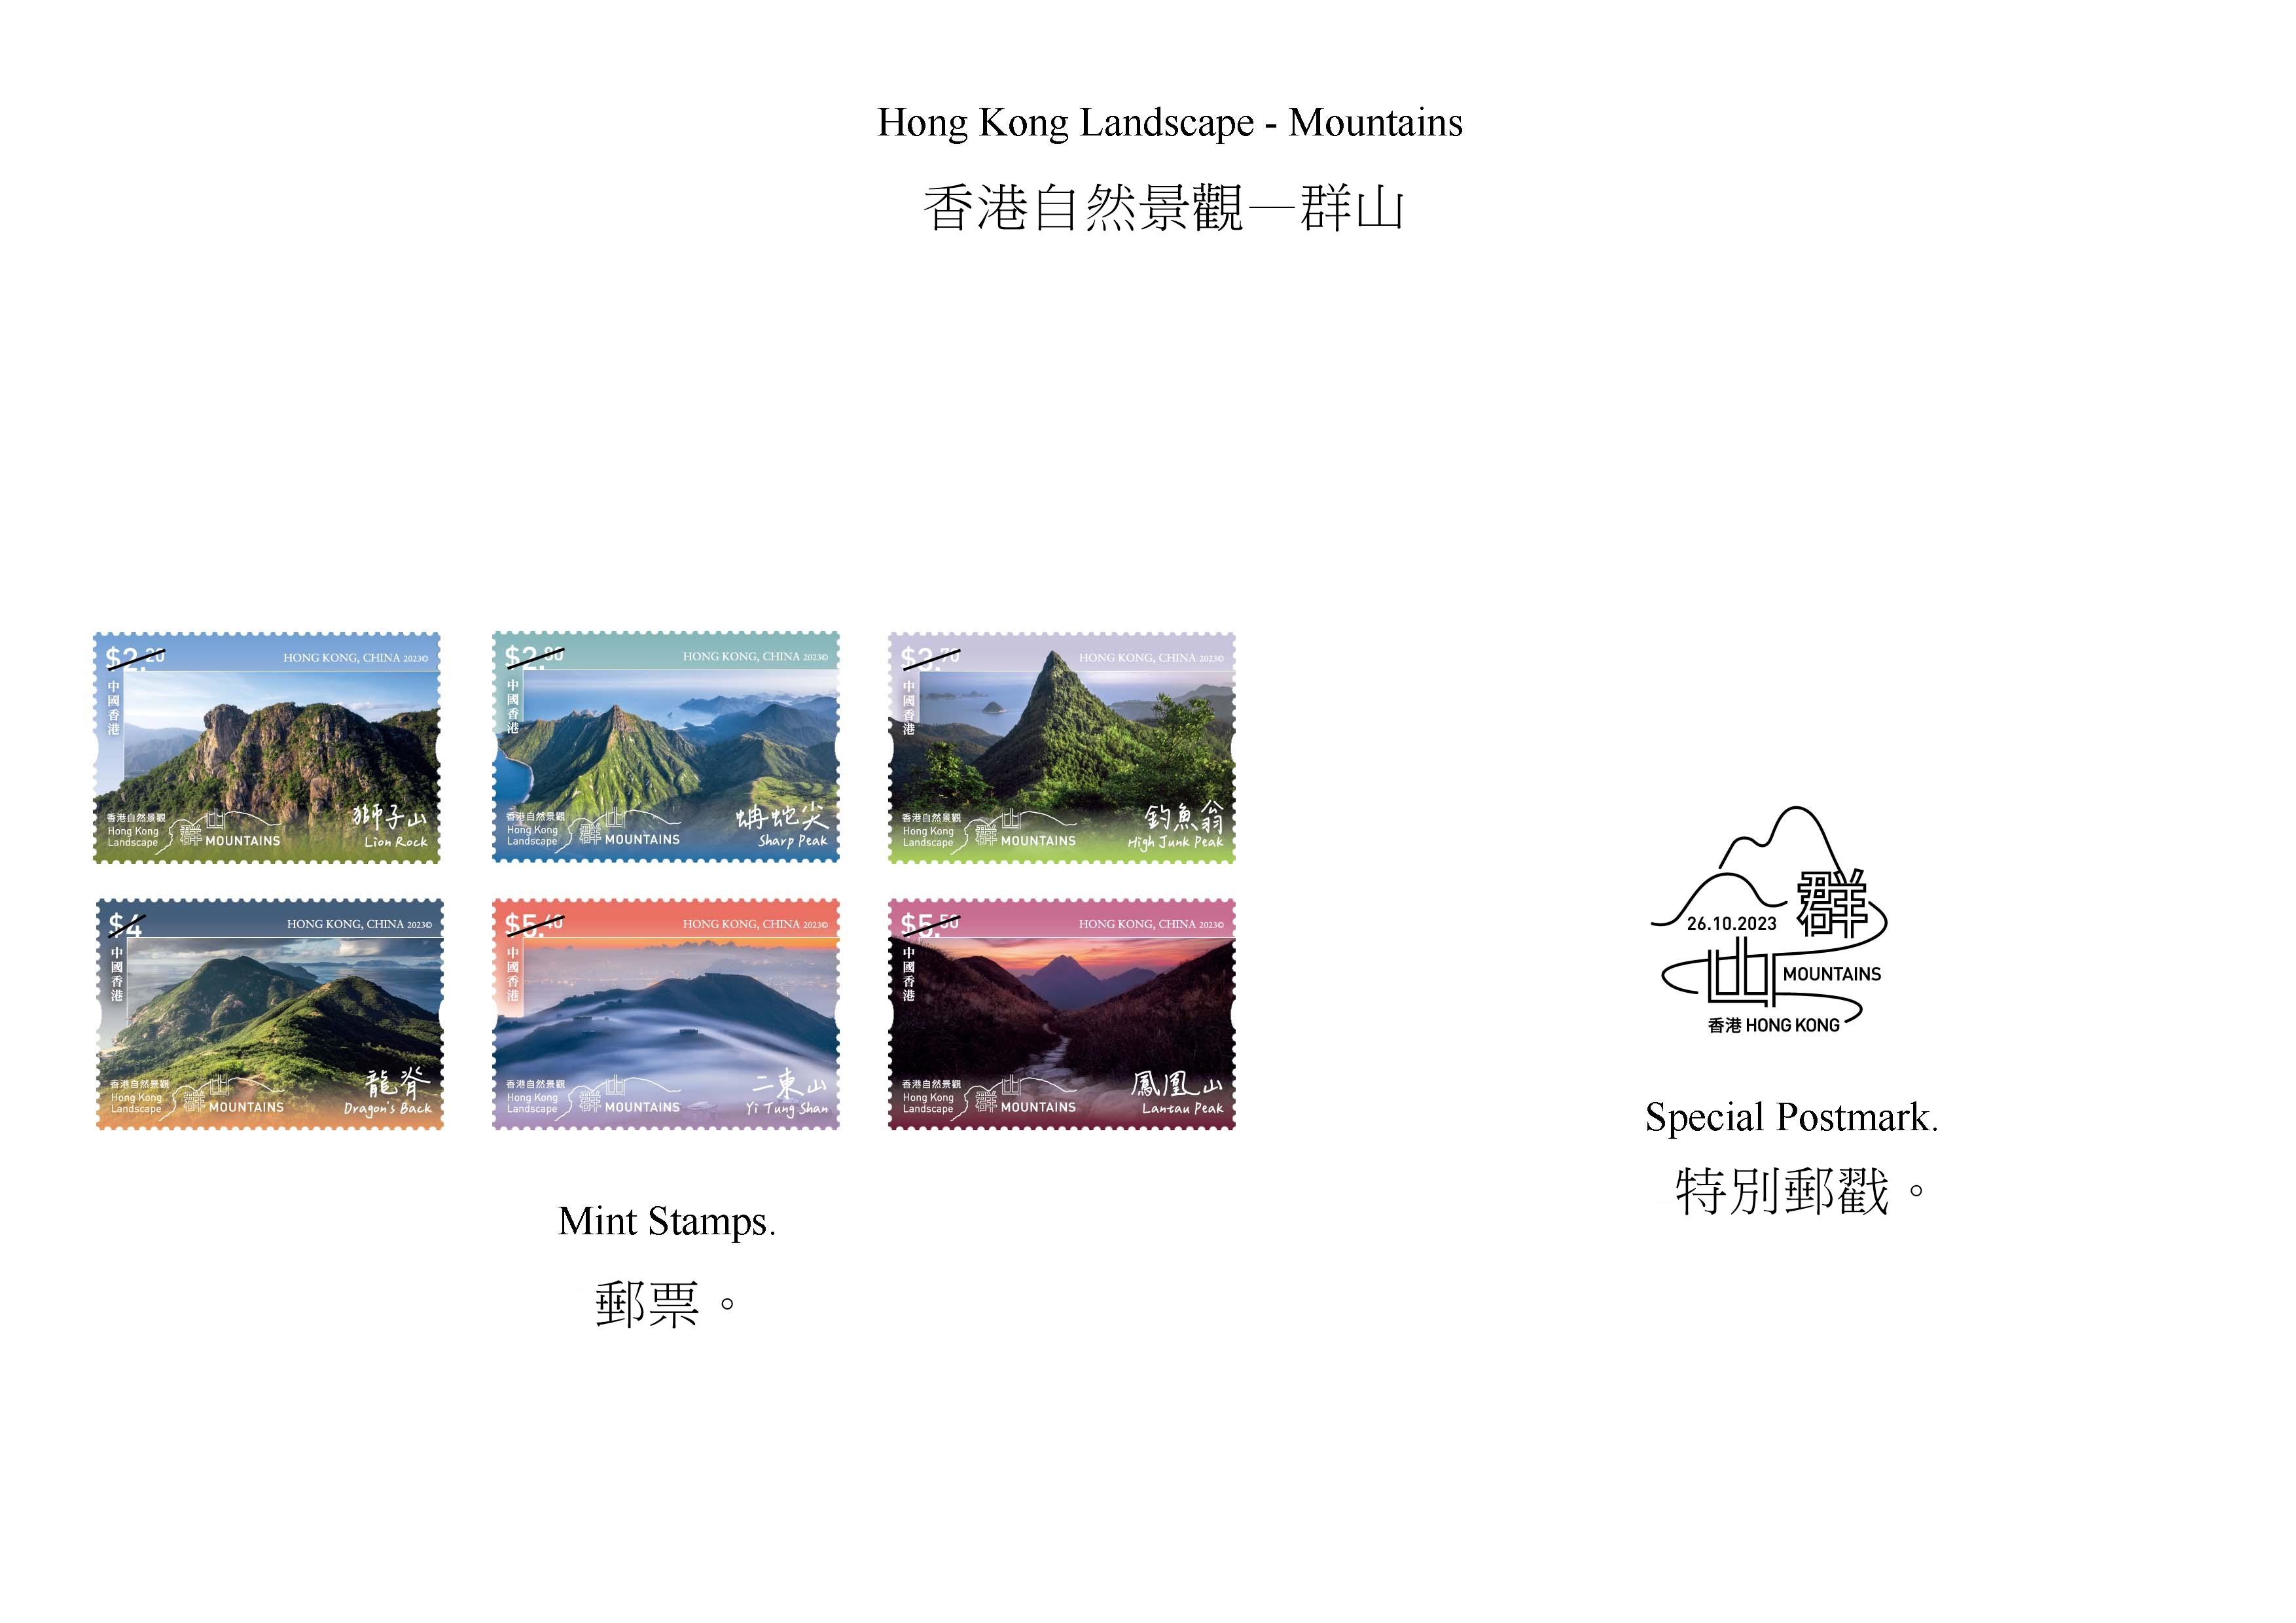 Hongkong Post will launch a special stamp issue and associated philatelic products on the theme of "Hong Kong Landscape - Mountains" on October 26 (Thursday). Photos show the mint stamps and the special postmark.

